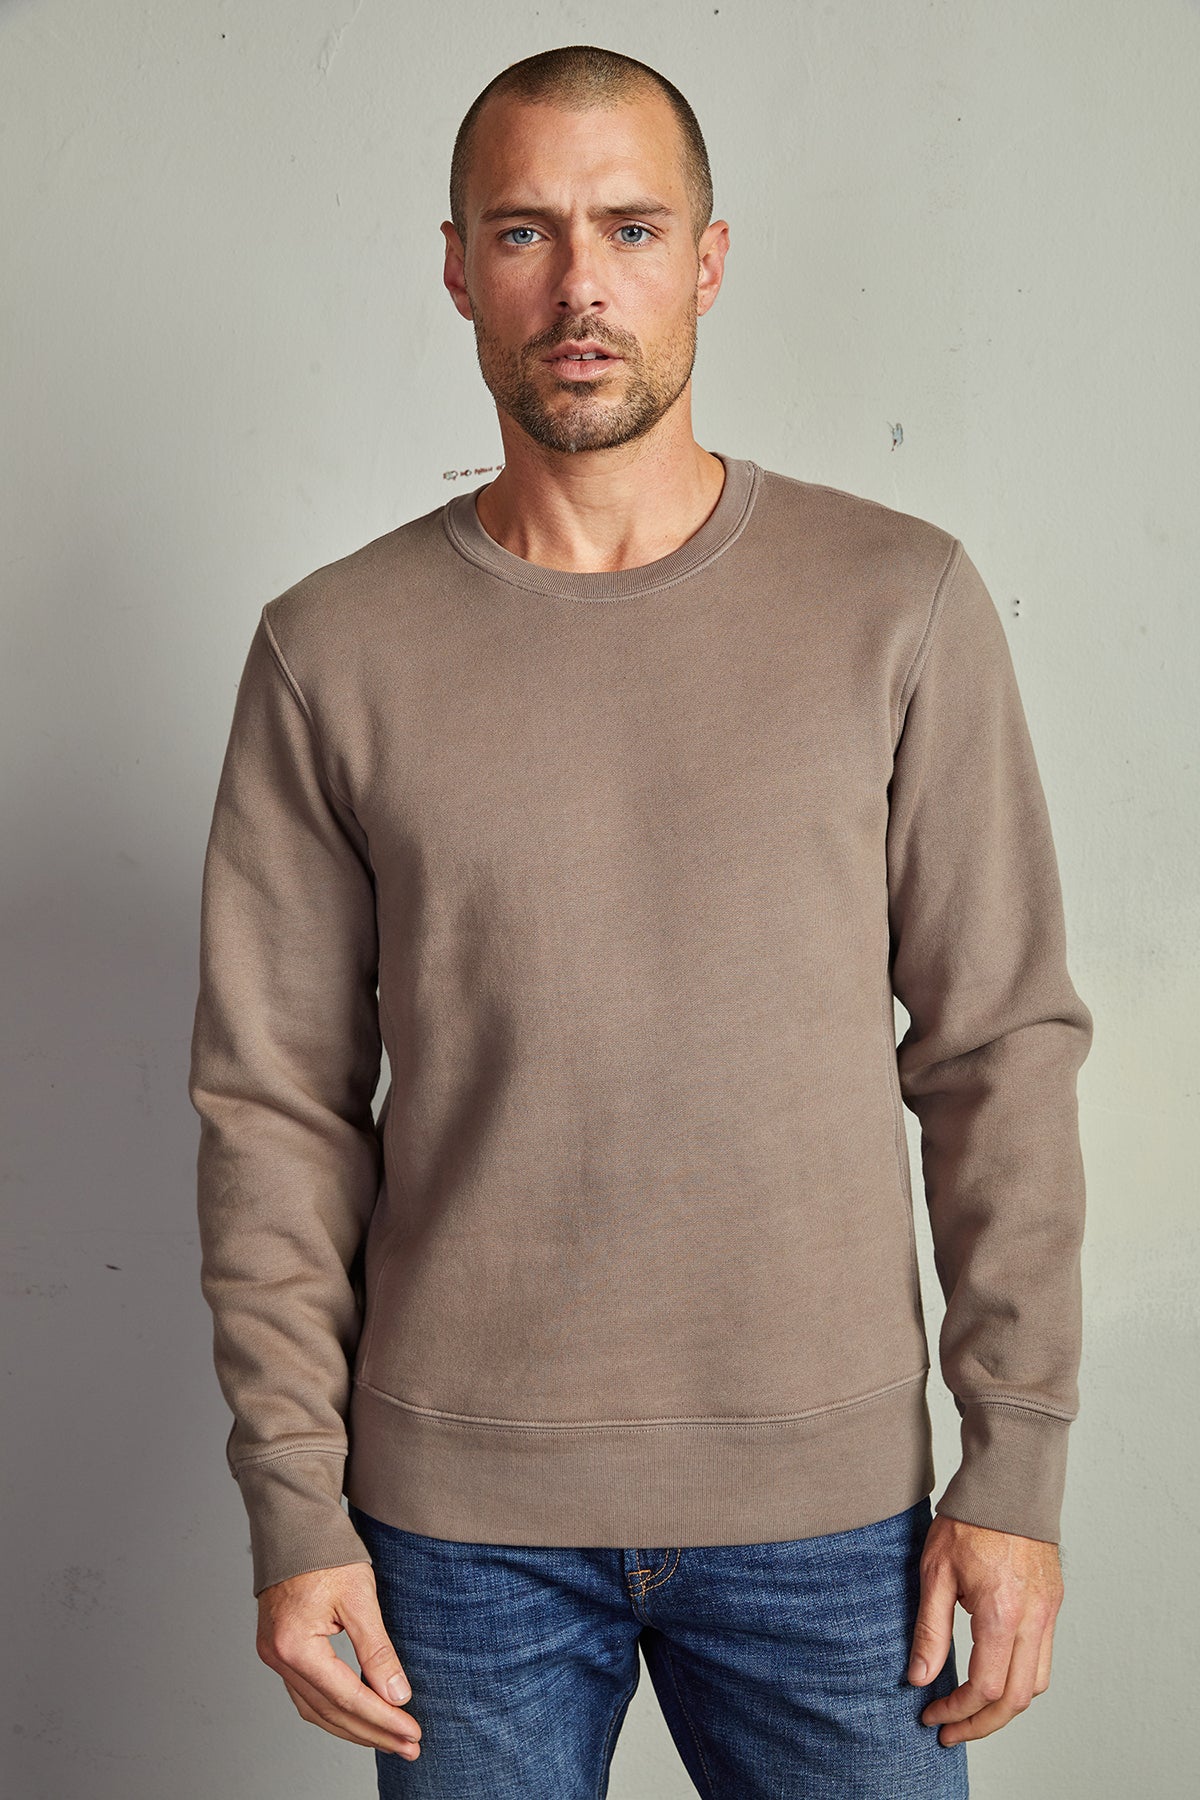 A man wearing a Velvet by Graham & Spencer KING CREW NECK SWEATSHIRT and jeans with clean lines.-14889960538305